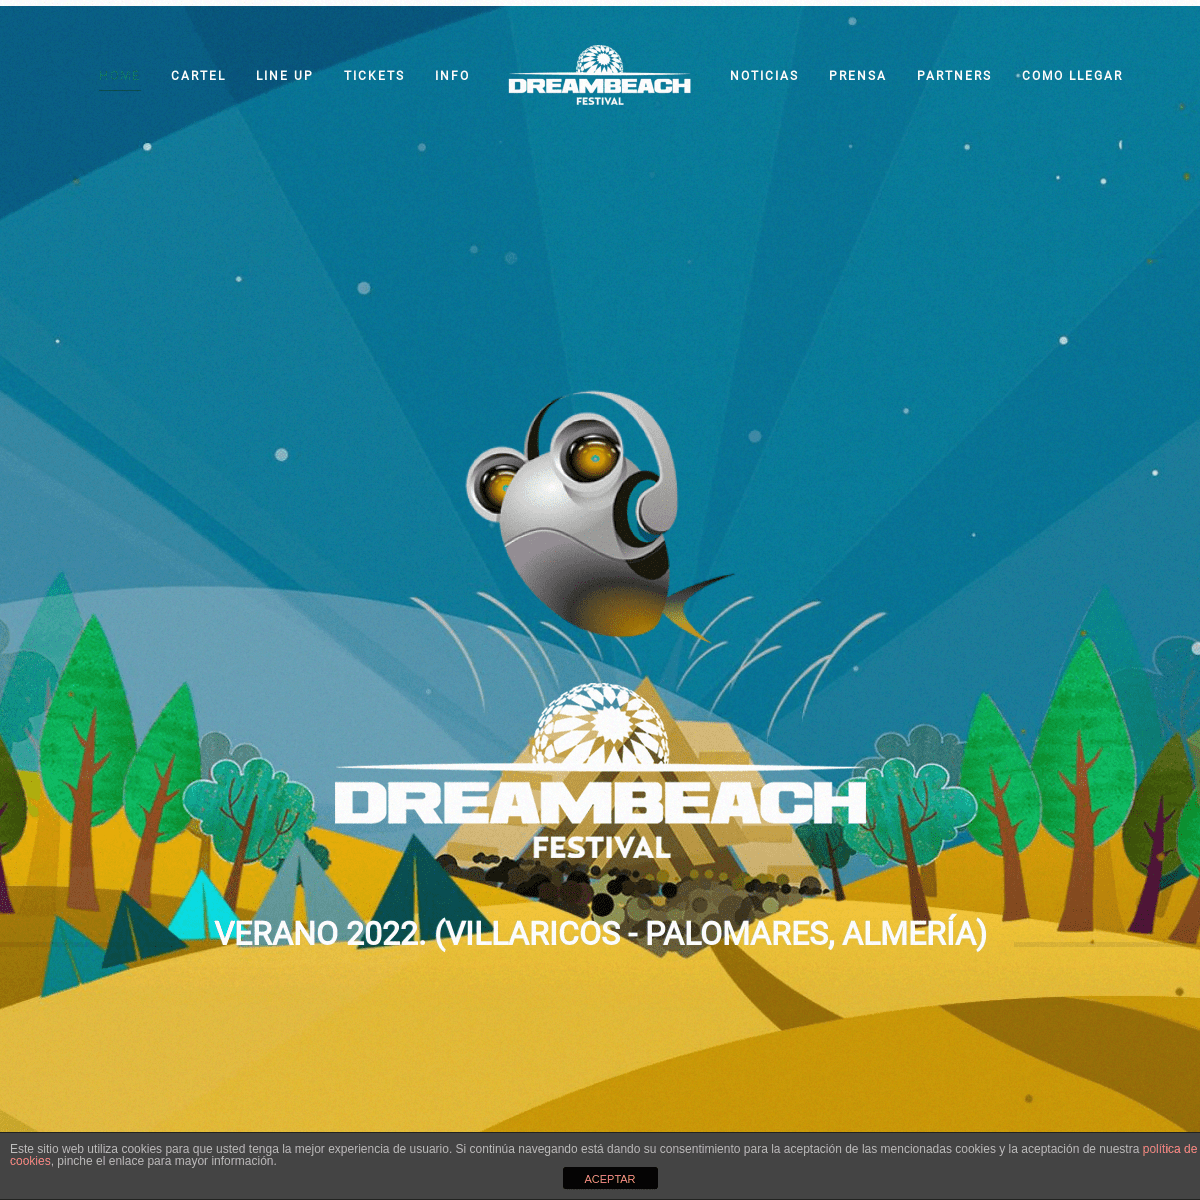 A complete backup of https://dreambeach.es